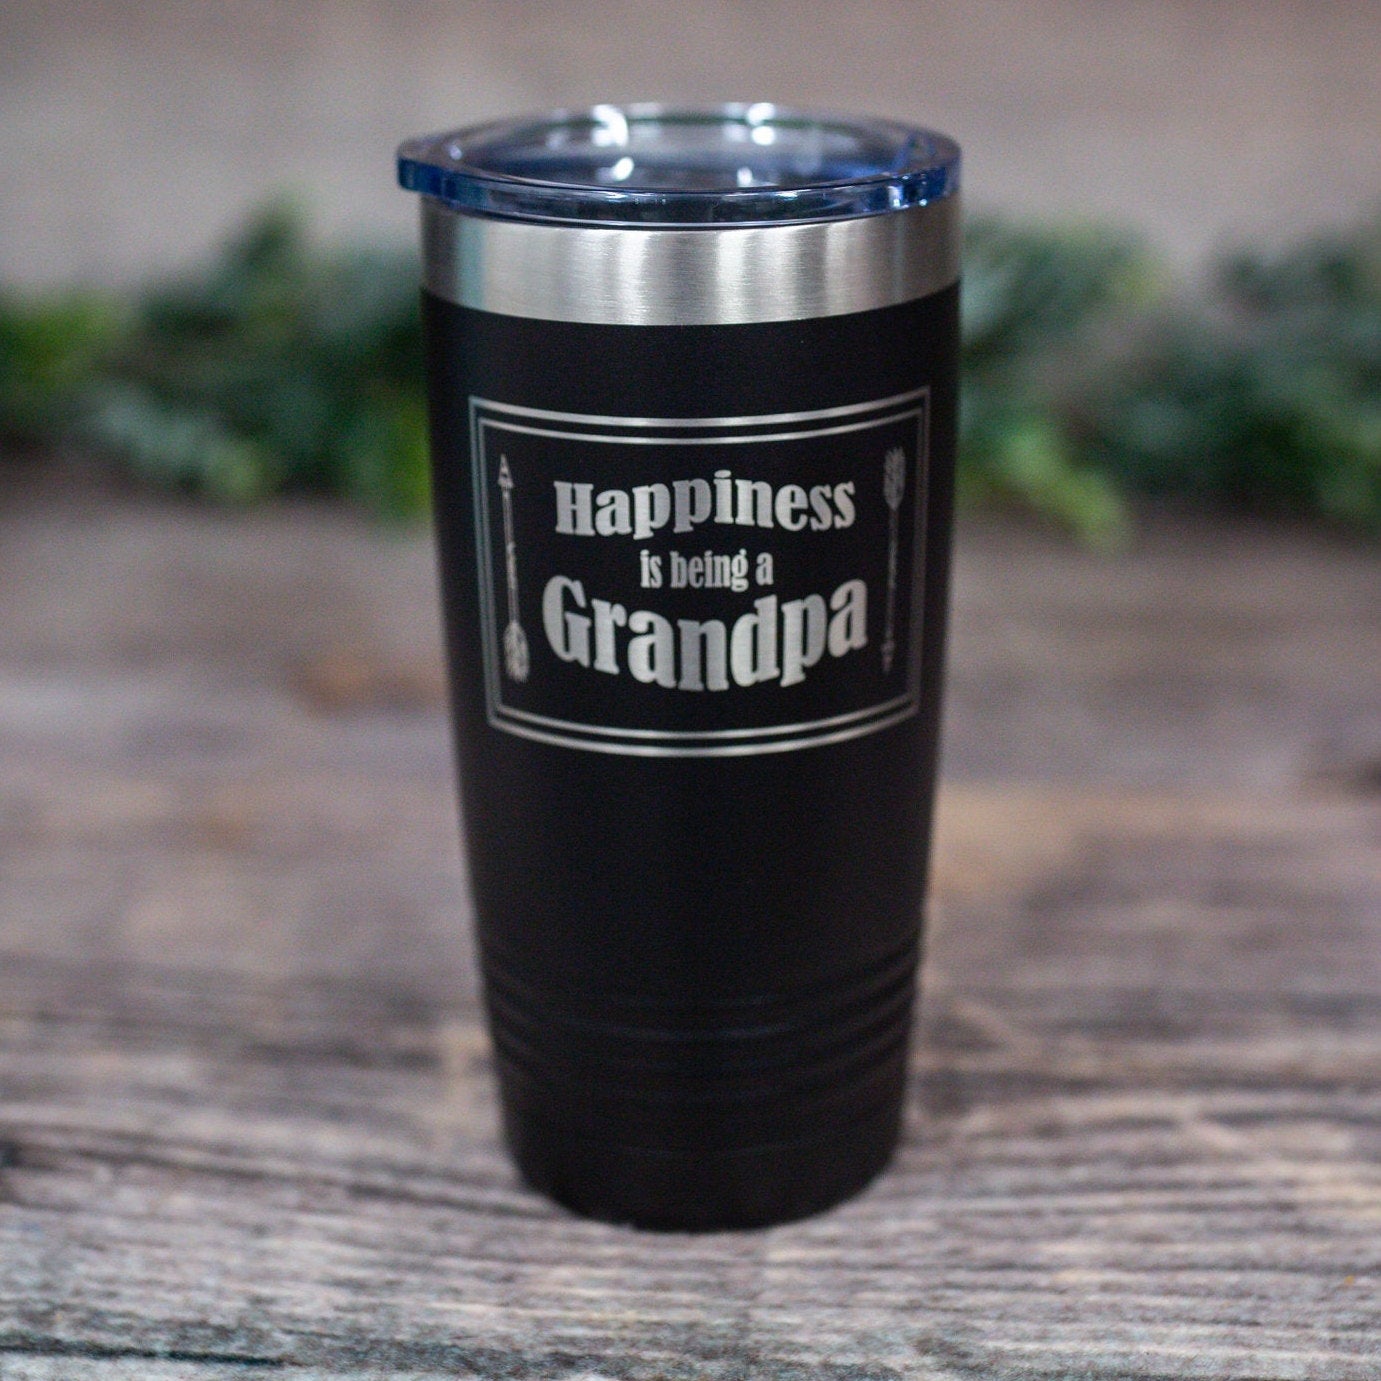 https://3cetching.com/wp-content/uploads/2021/07/happiness-is-being-a-grandpa-engraved-stainless-steel-tumbler-best-grandpa-mug-grandfather-gift-cup-60f739c4.jpg